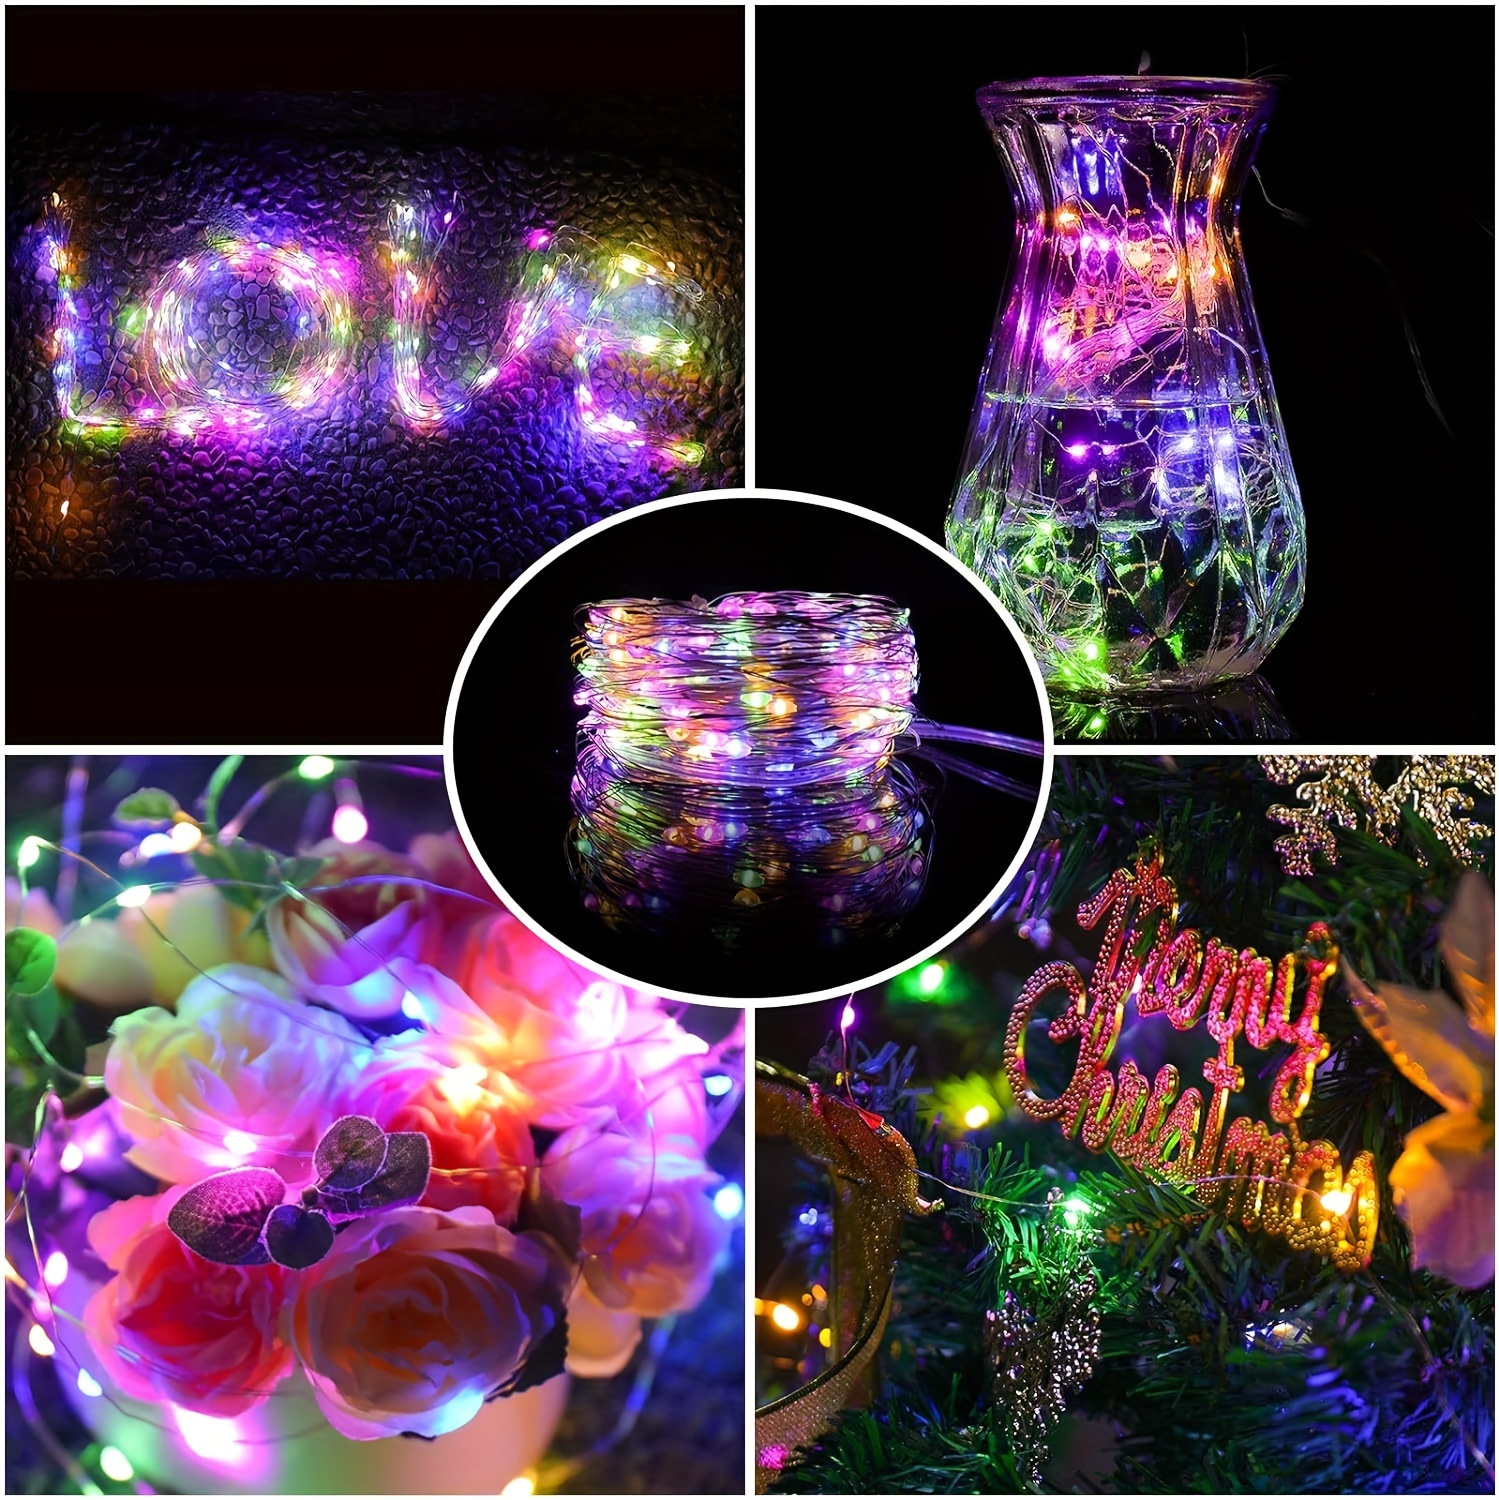 gifts, led string light 33 6633ft fairy lights usb powered warm white multicolored 100 200 leds ipx6 waterproof perfect for outdoor indoor christmas xmas tree thanksgiving day gifts garden winter decor parties weddings festivals bedroom and table decoration details 3